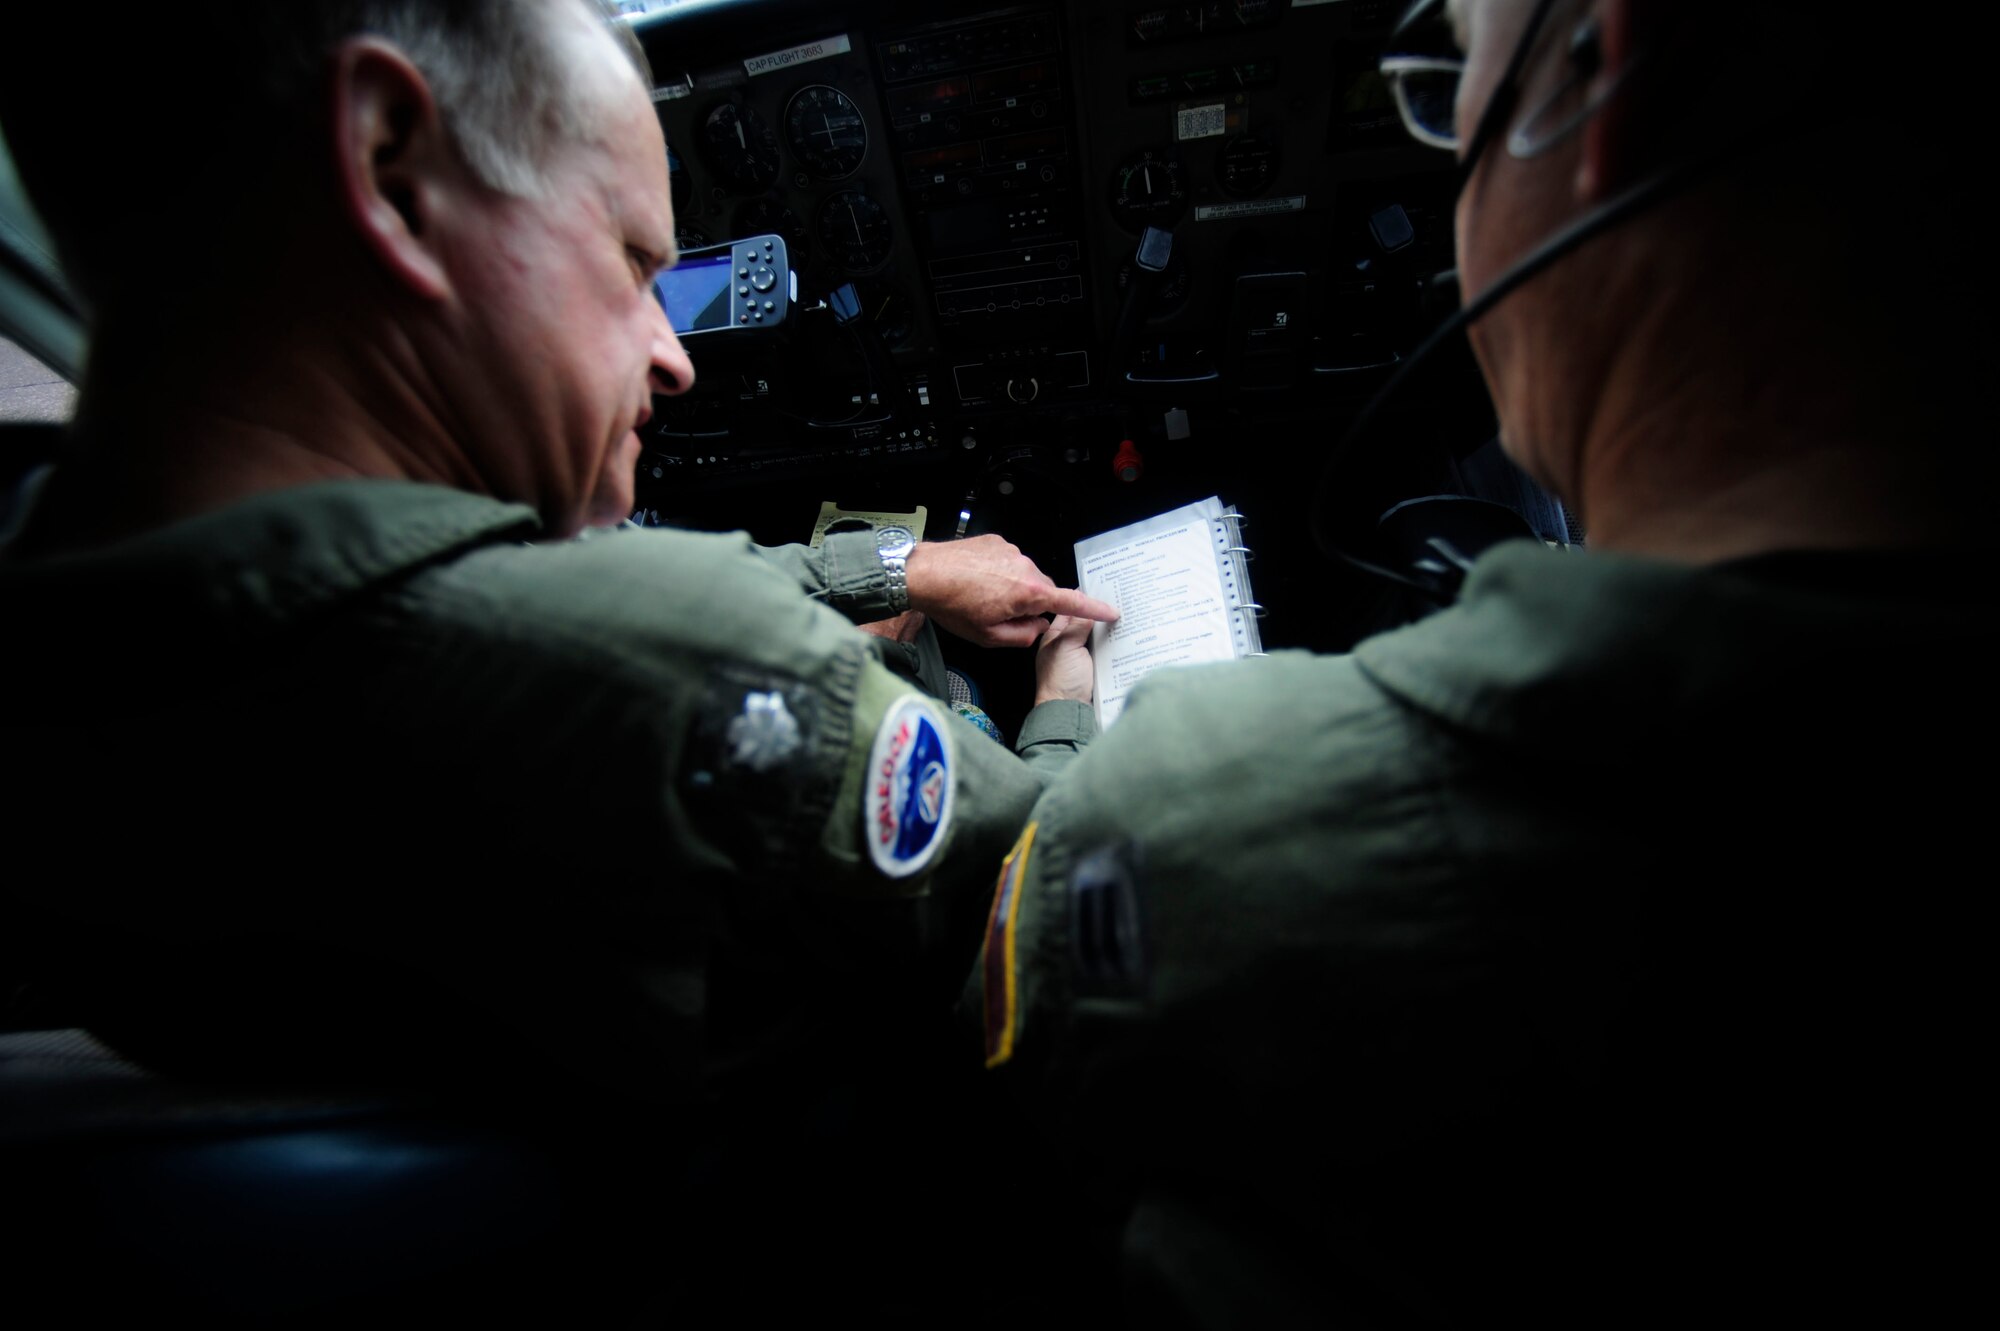 Lt. Col. Wayne Schulz (left) and Capt. John Barringer, U.S. Air Force Auxiliary, Civil Air Patrol, conduct preflight checks in a C-182 Cessna before departing Astoria, Ore. during Amalgam Dart 2009, June 18. Amalgam Dart is a field test of the Department of Defense's ability to rapidly deploy a total air integrated defense system in the U.S. in order to deter, detect and defeat airborne threats. (U.S. Air Force photo by Staff Sgt. Jacob N. Bailey)